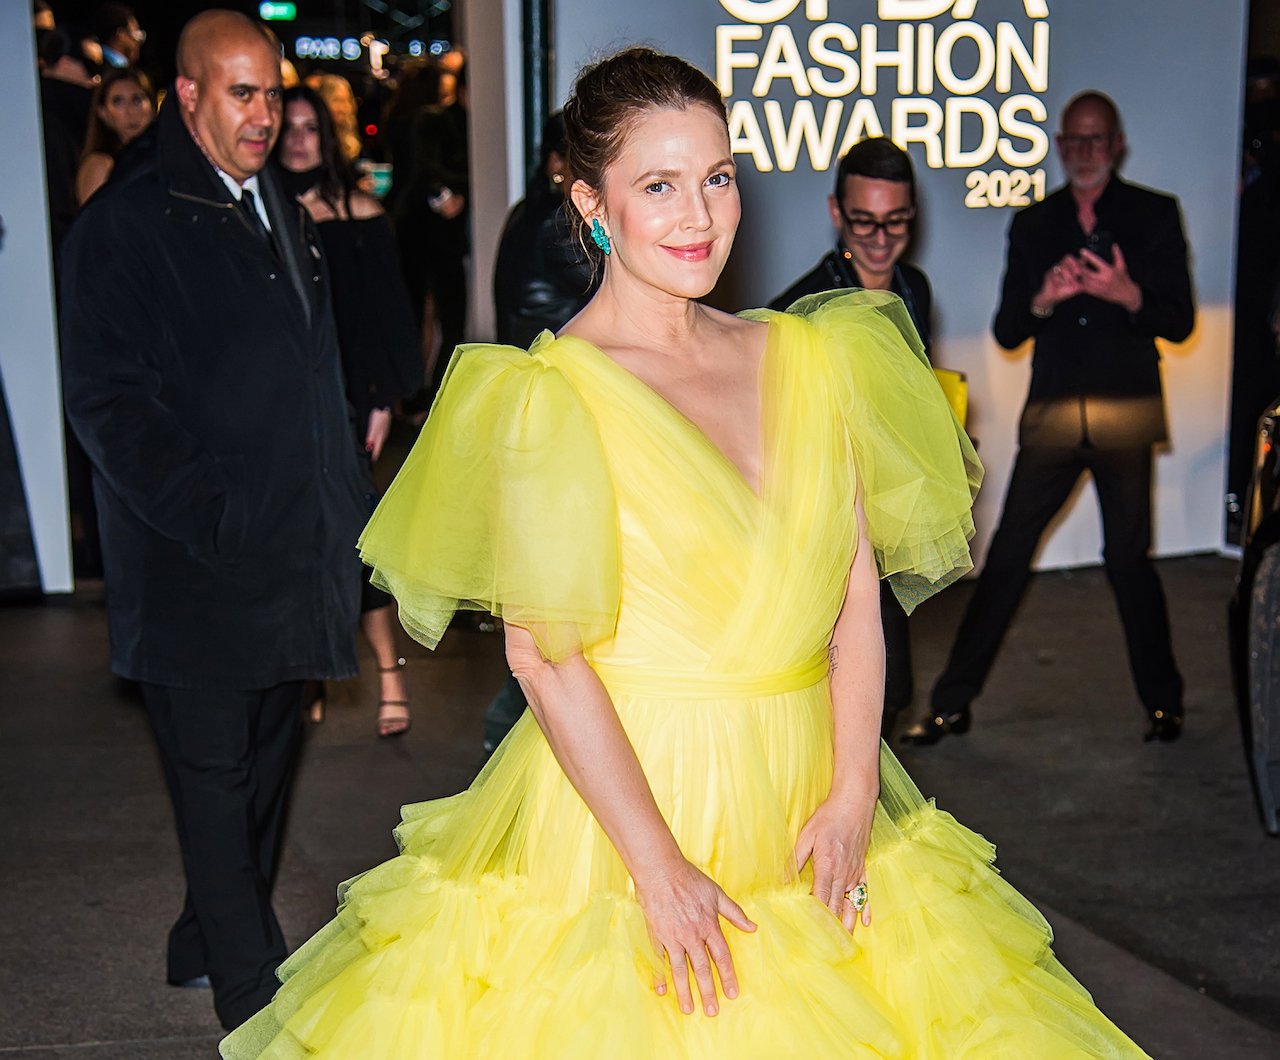 Drew Barrymore poses and smiles in a bright yellow dress